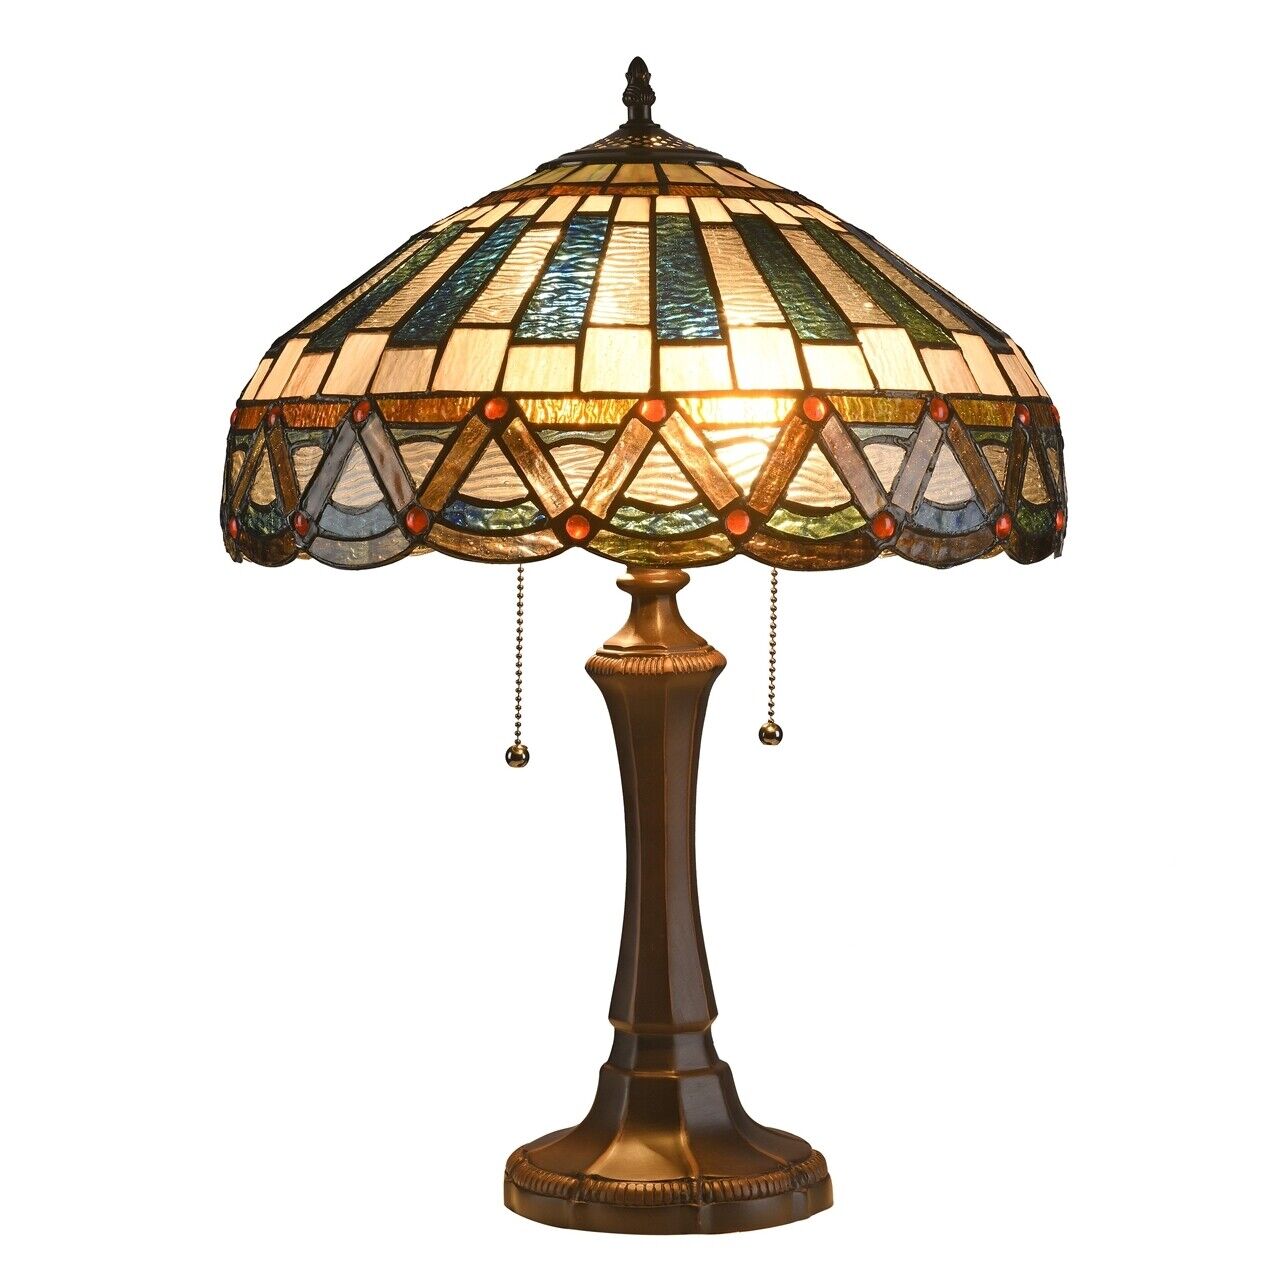 21.9" Antique Style Stained Glass Table Lamp 16.1" Shade